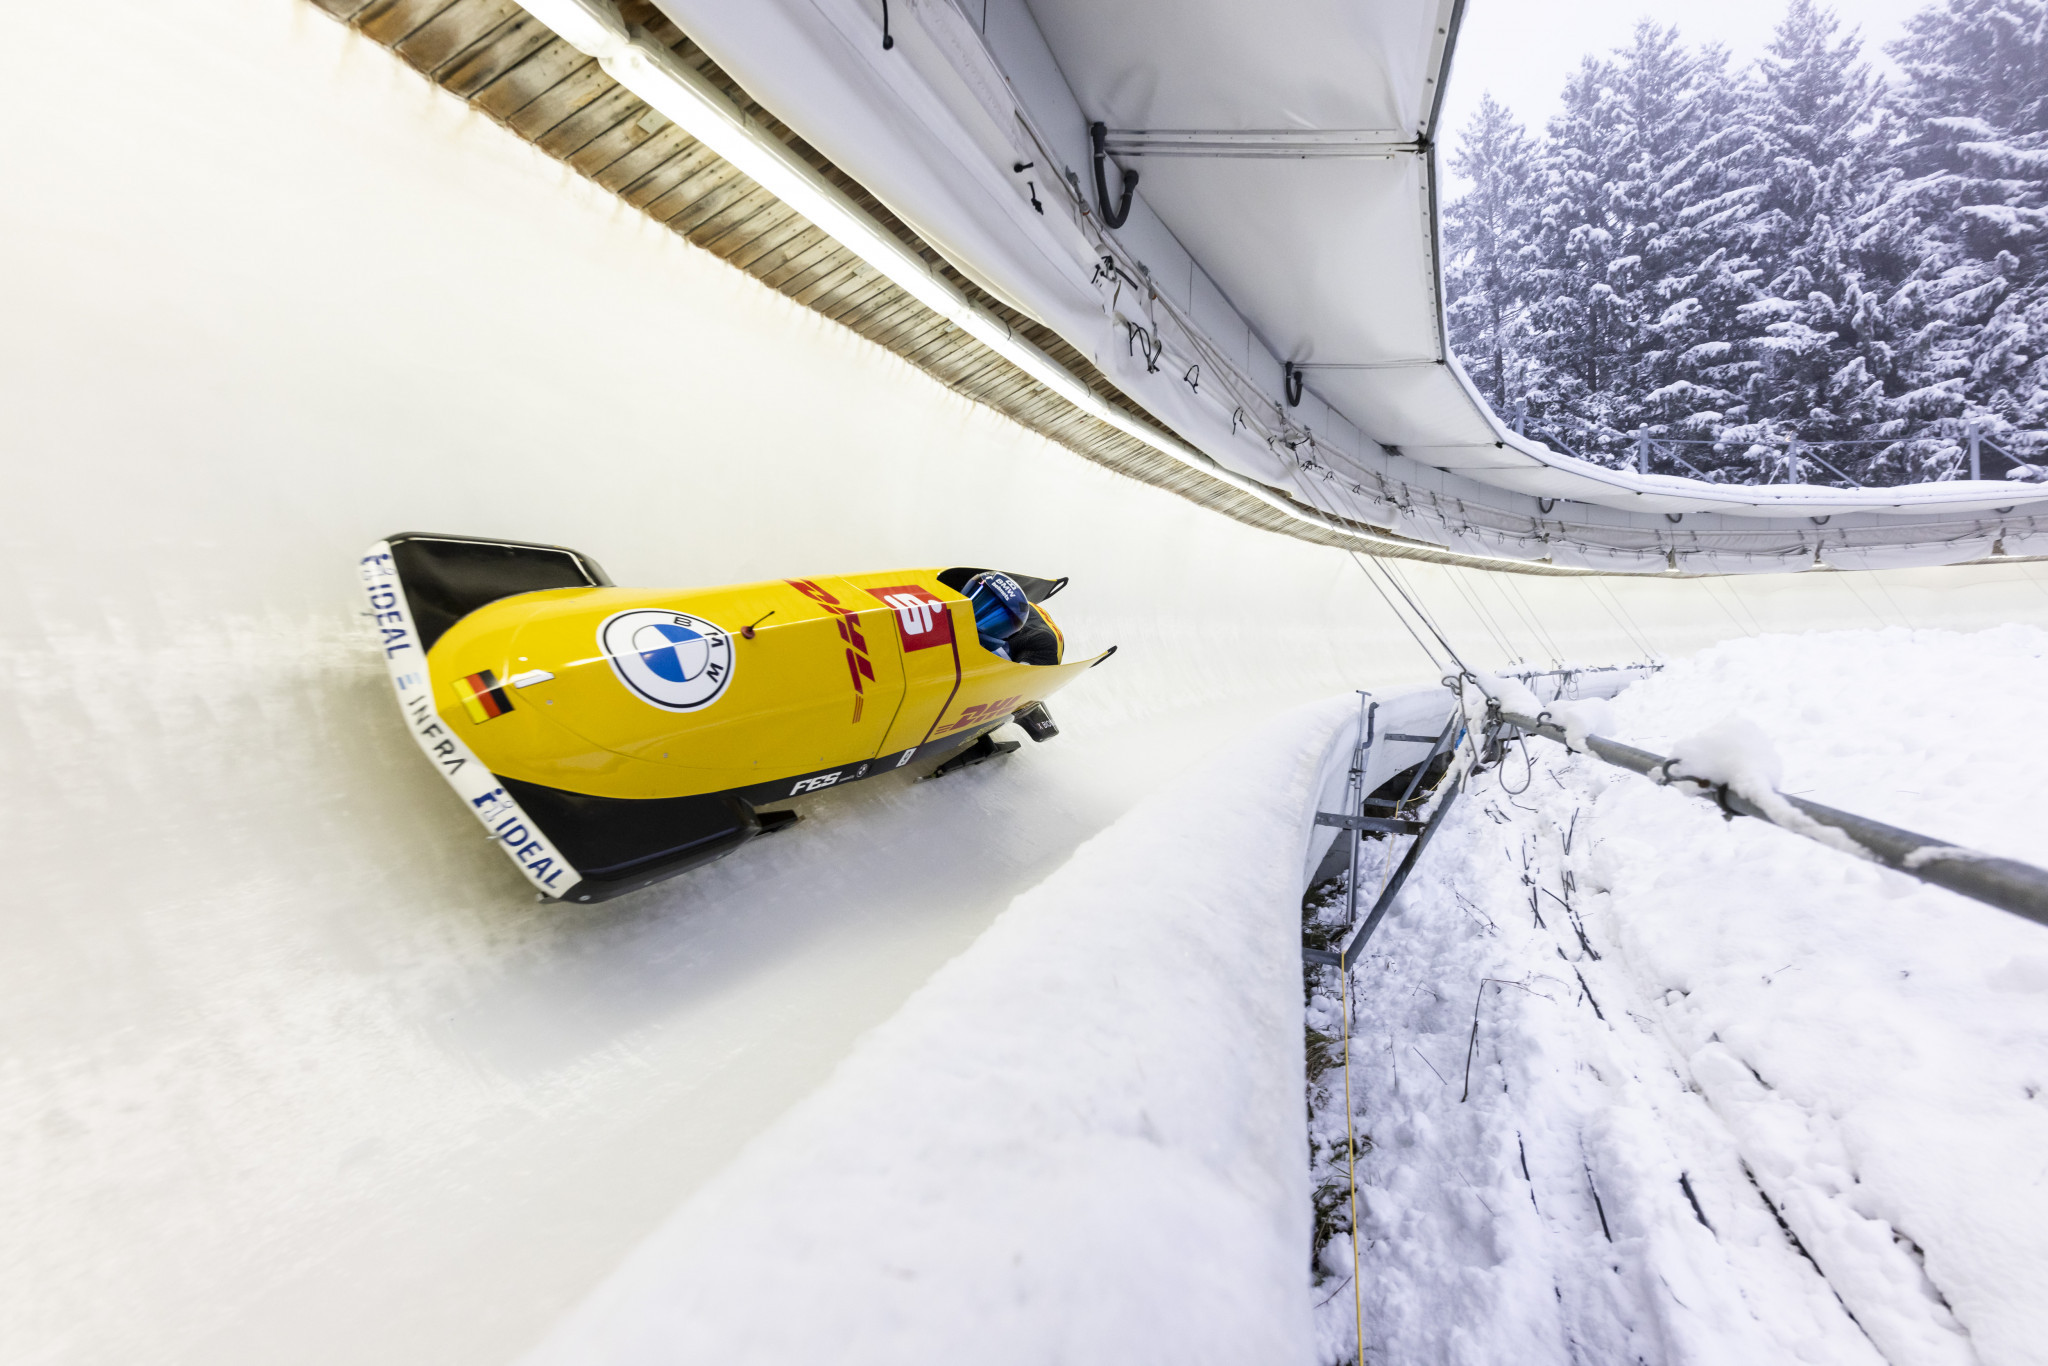 Francesco Friedrich and Thorsten Margis won the two-man bobsleigh event in Innsbruck ©Getty Images